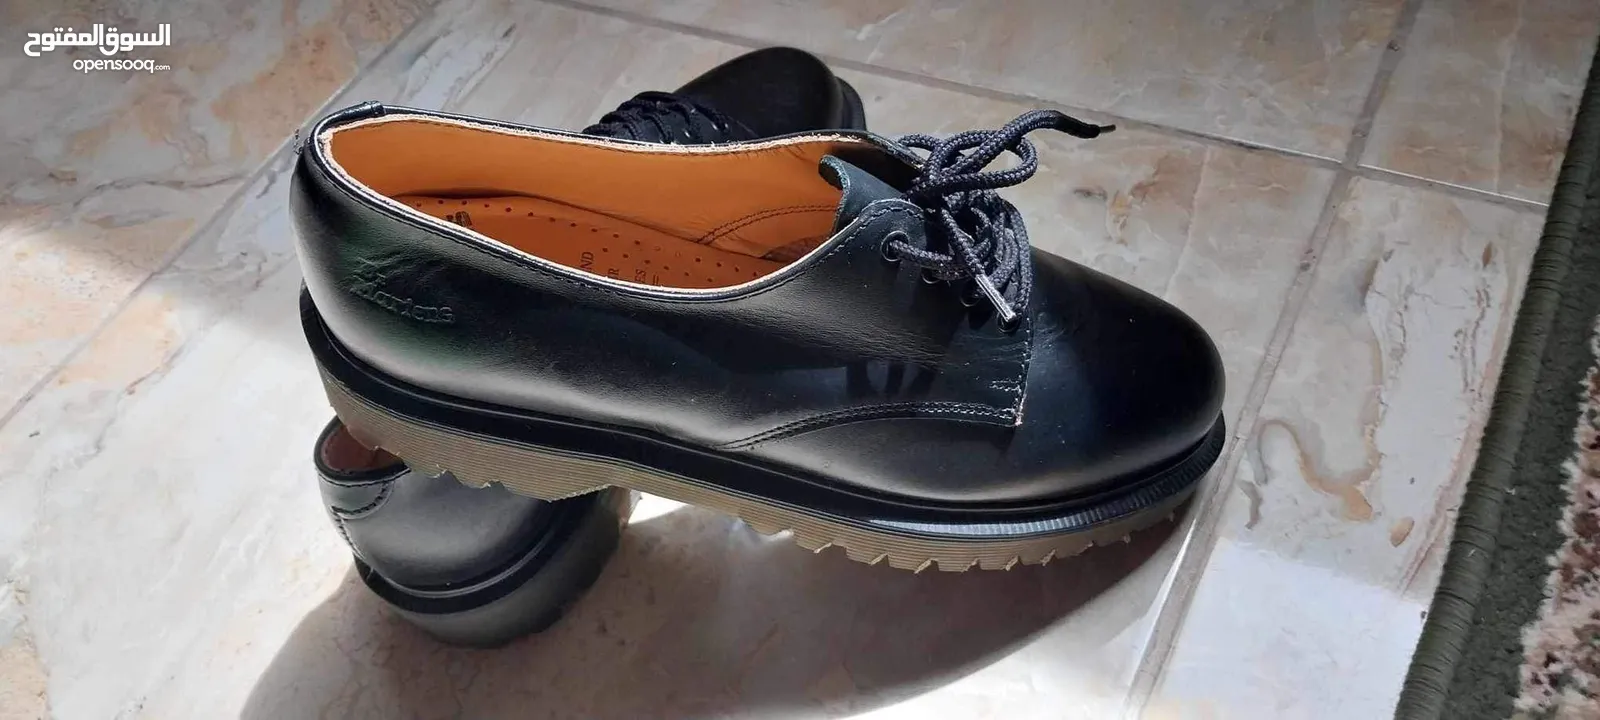 Dr.Martens 1461 leather shoes new